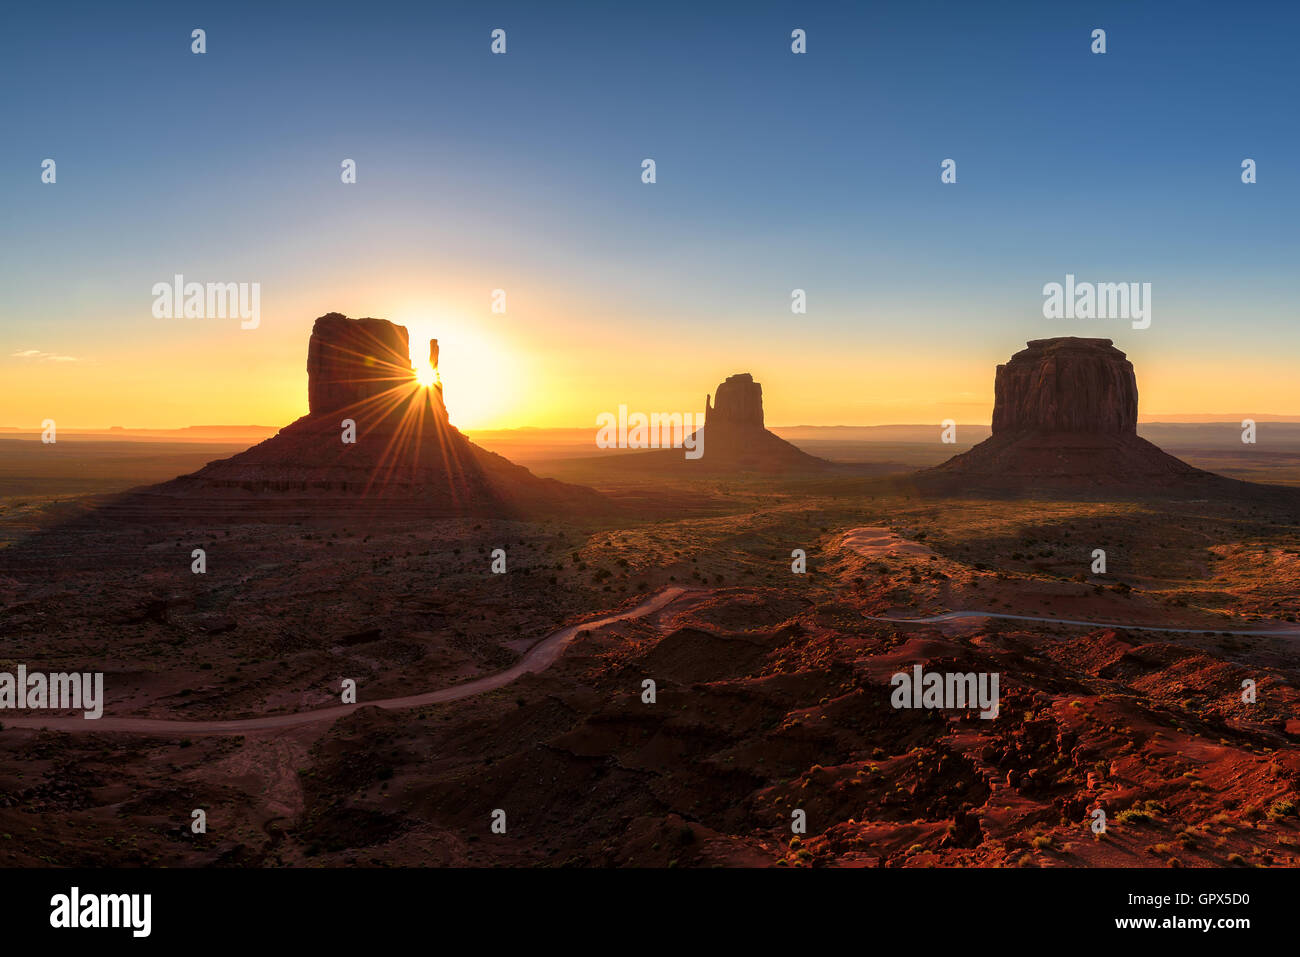 West and East Mittens at Sunrise, Monument Valley Navajo Tribal Park, Arizona, USA Stock Photo